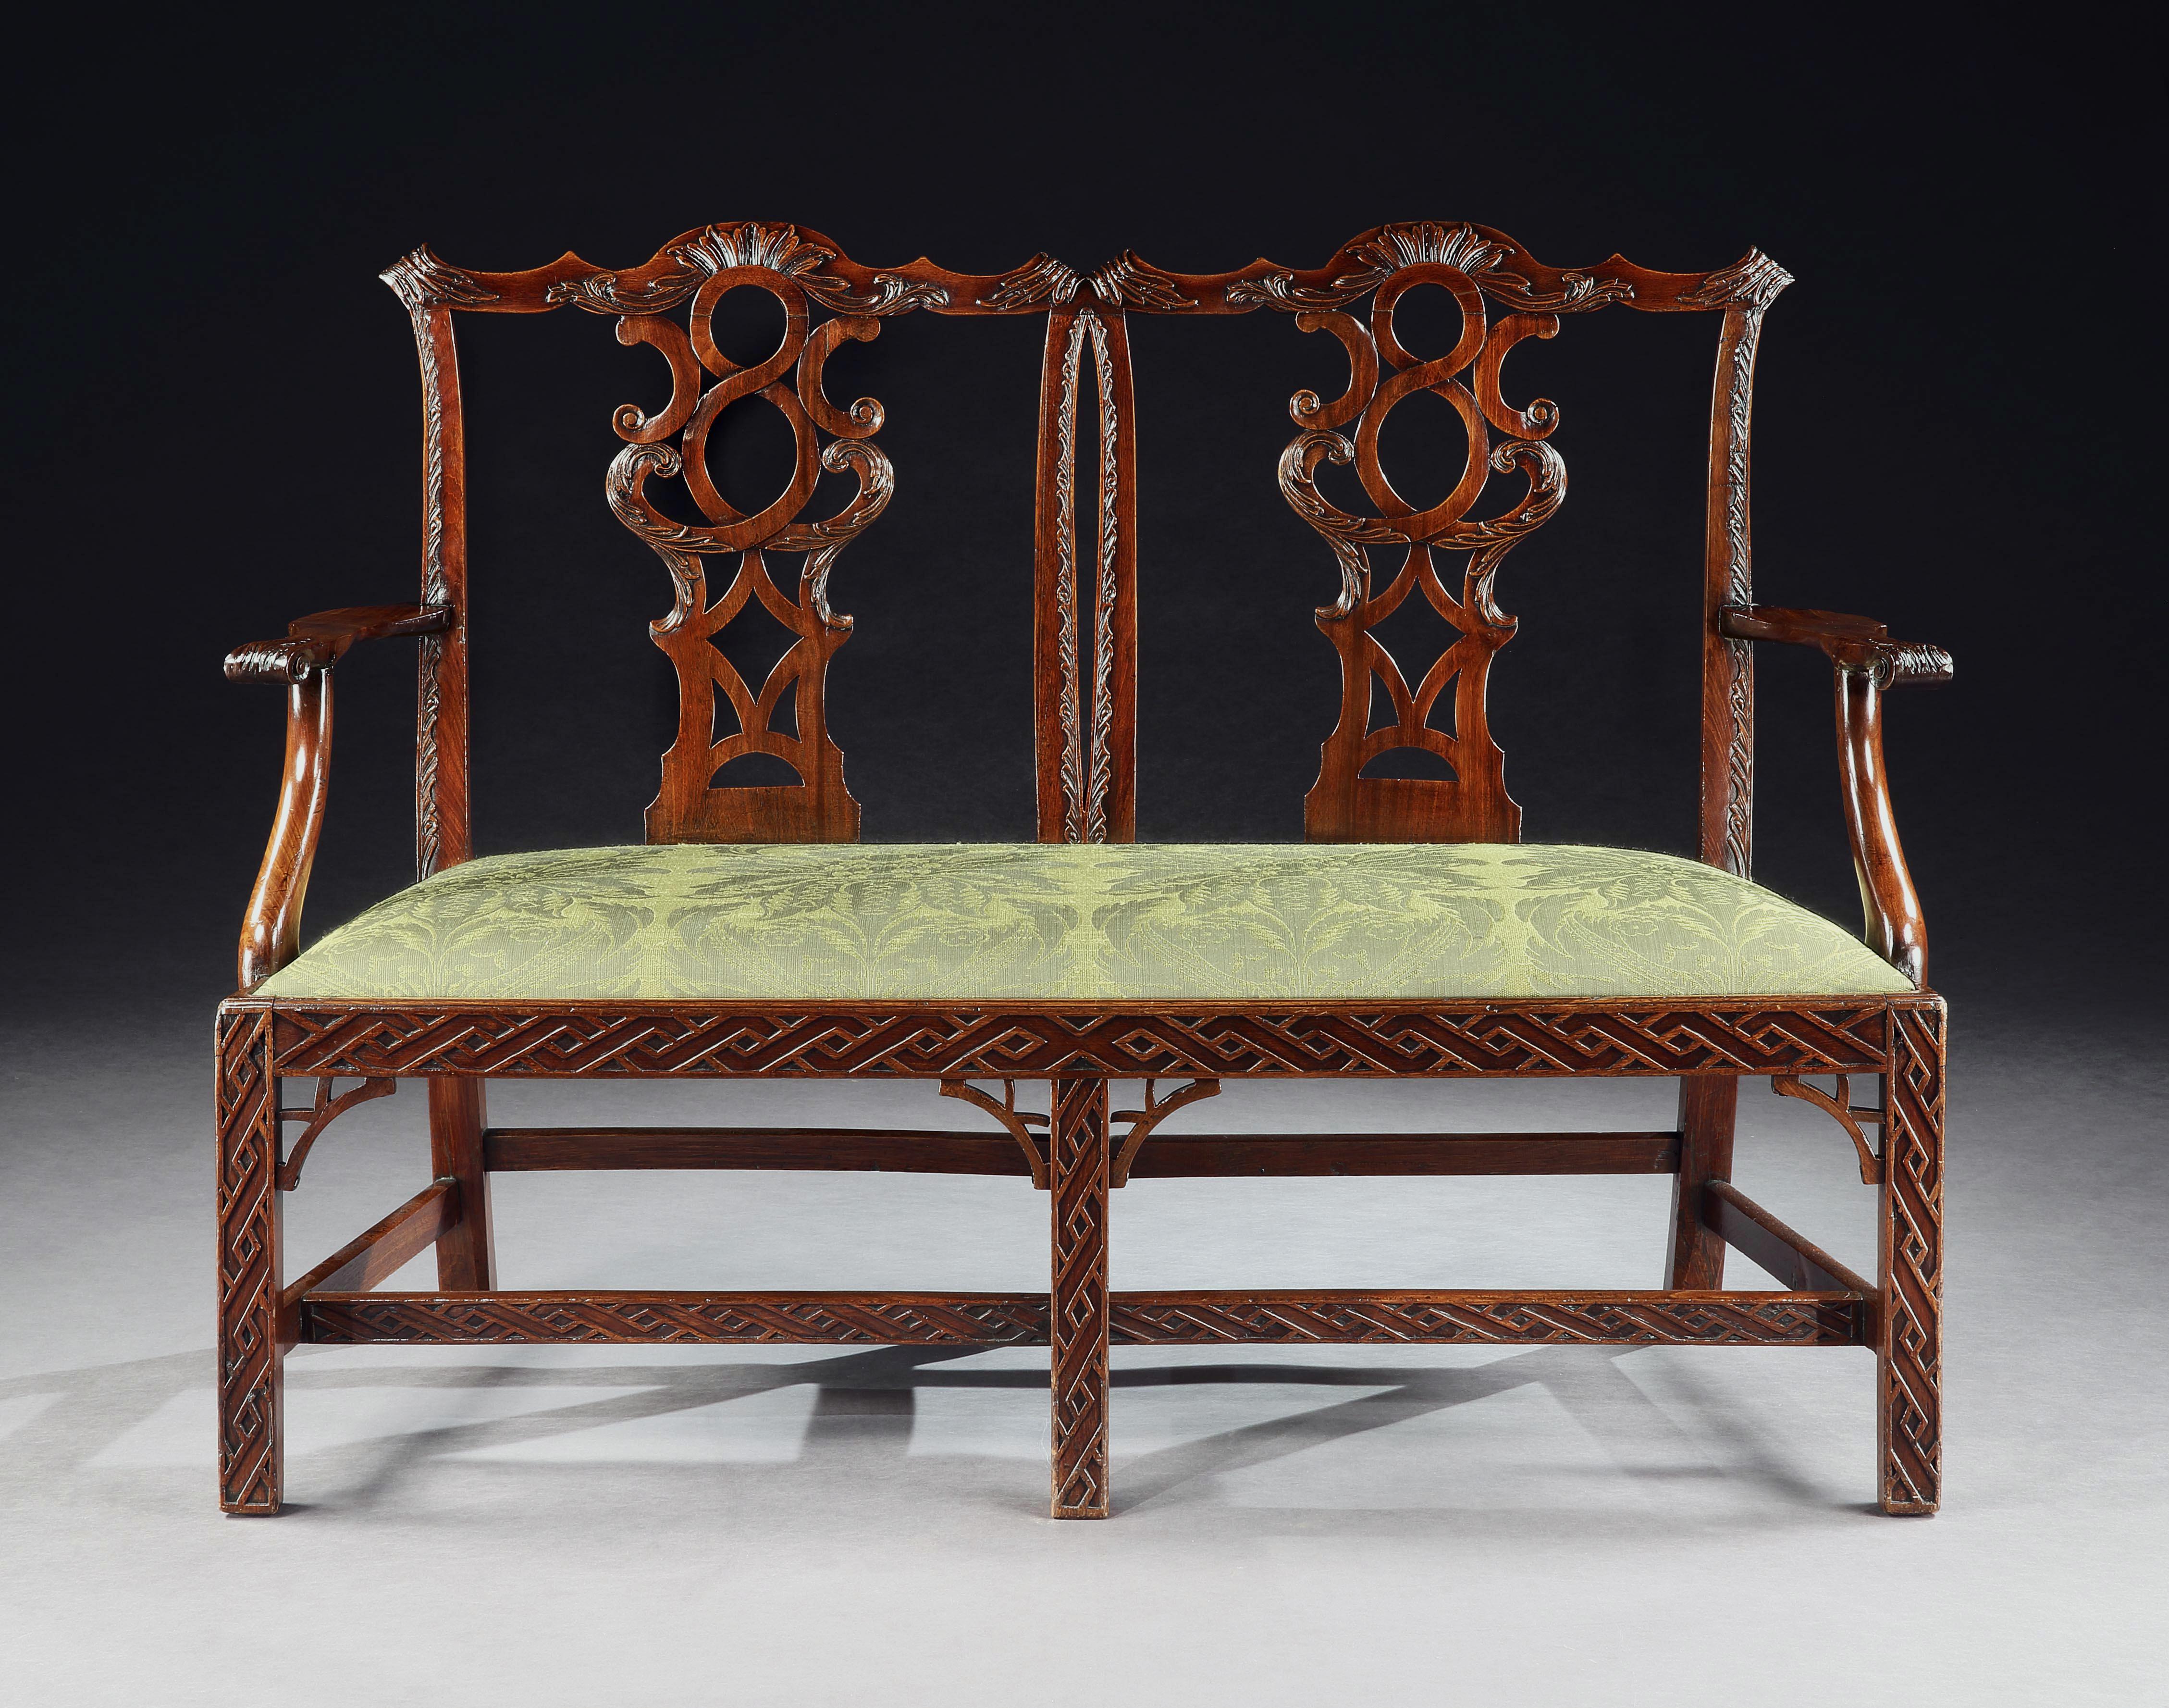 A fine mid-18th century Chippendale double chairback settee in mahogany with carved shaped top rails, pierced carved splats and outscrolling arms. The drop in seat covered in gold silk damask, the frieze and square chamfered legs decorated